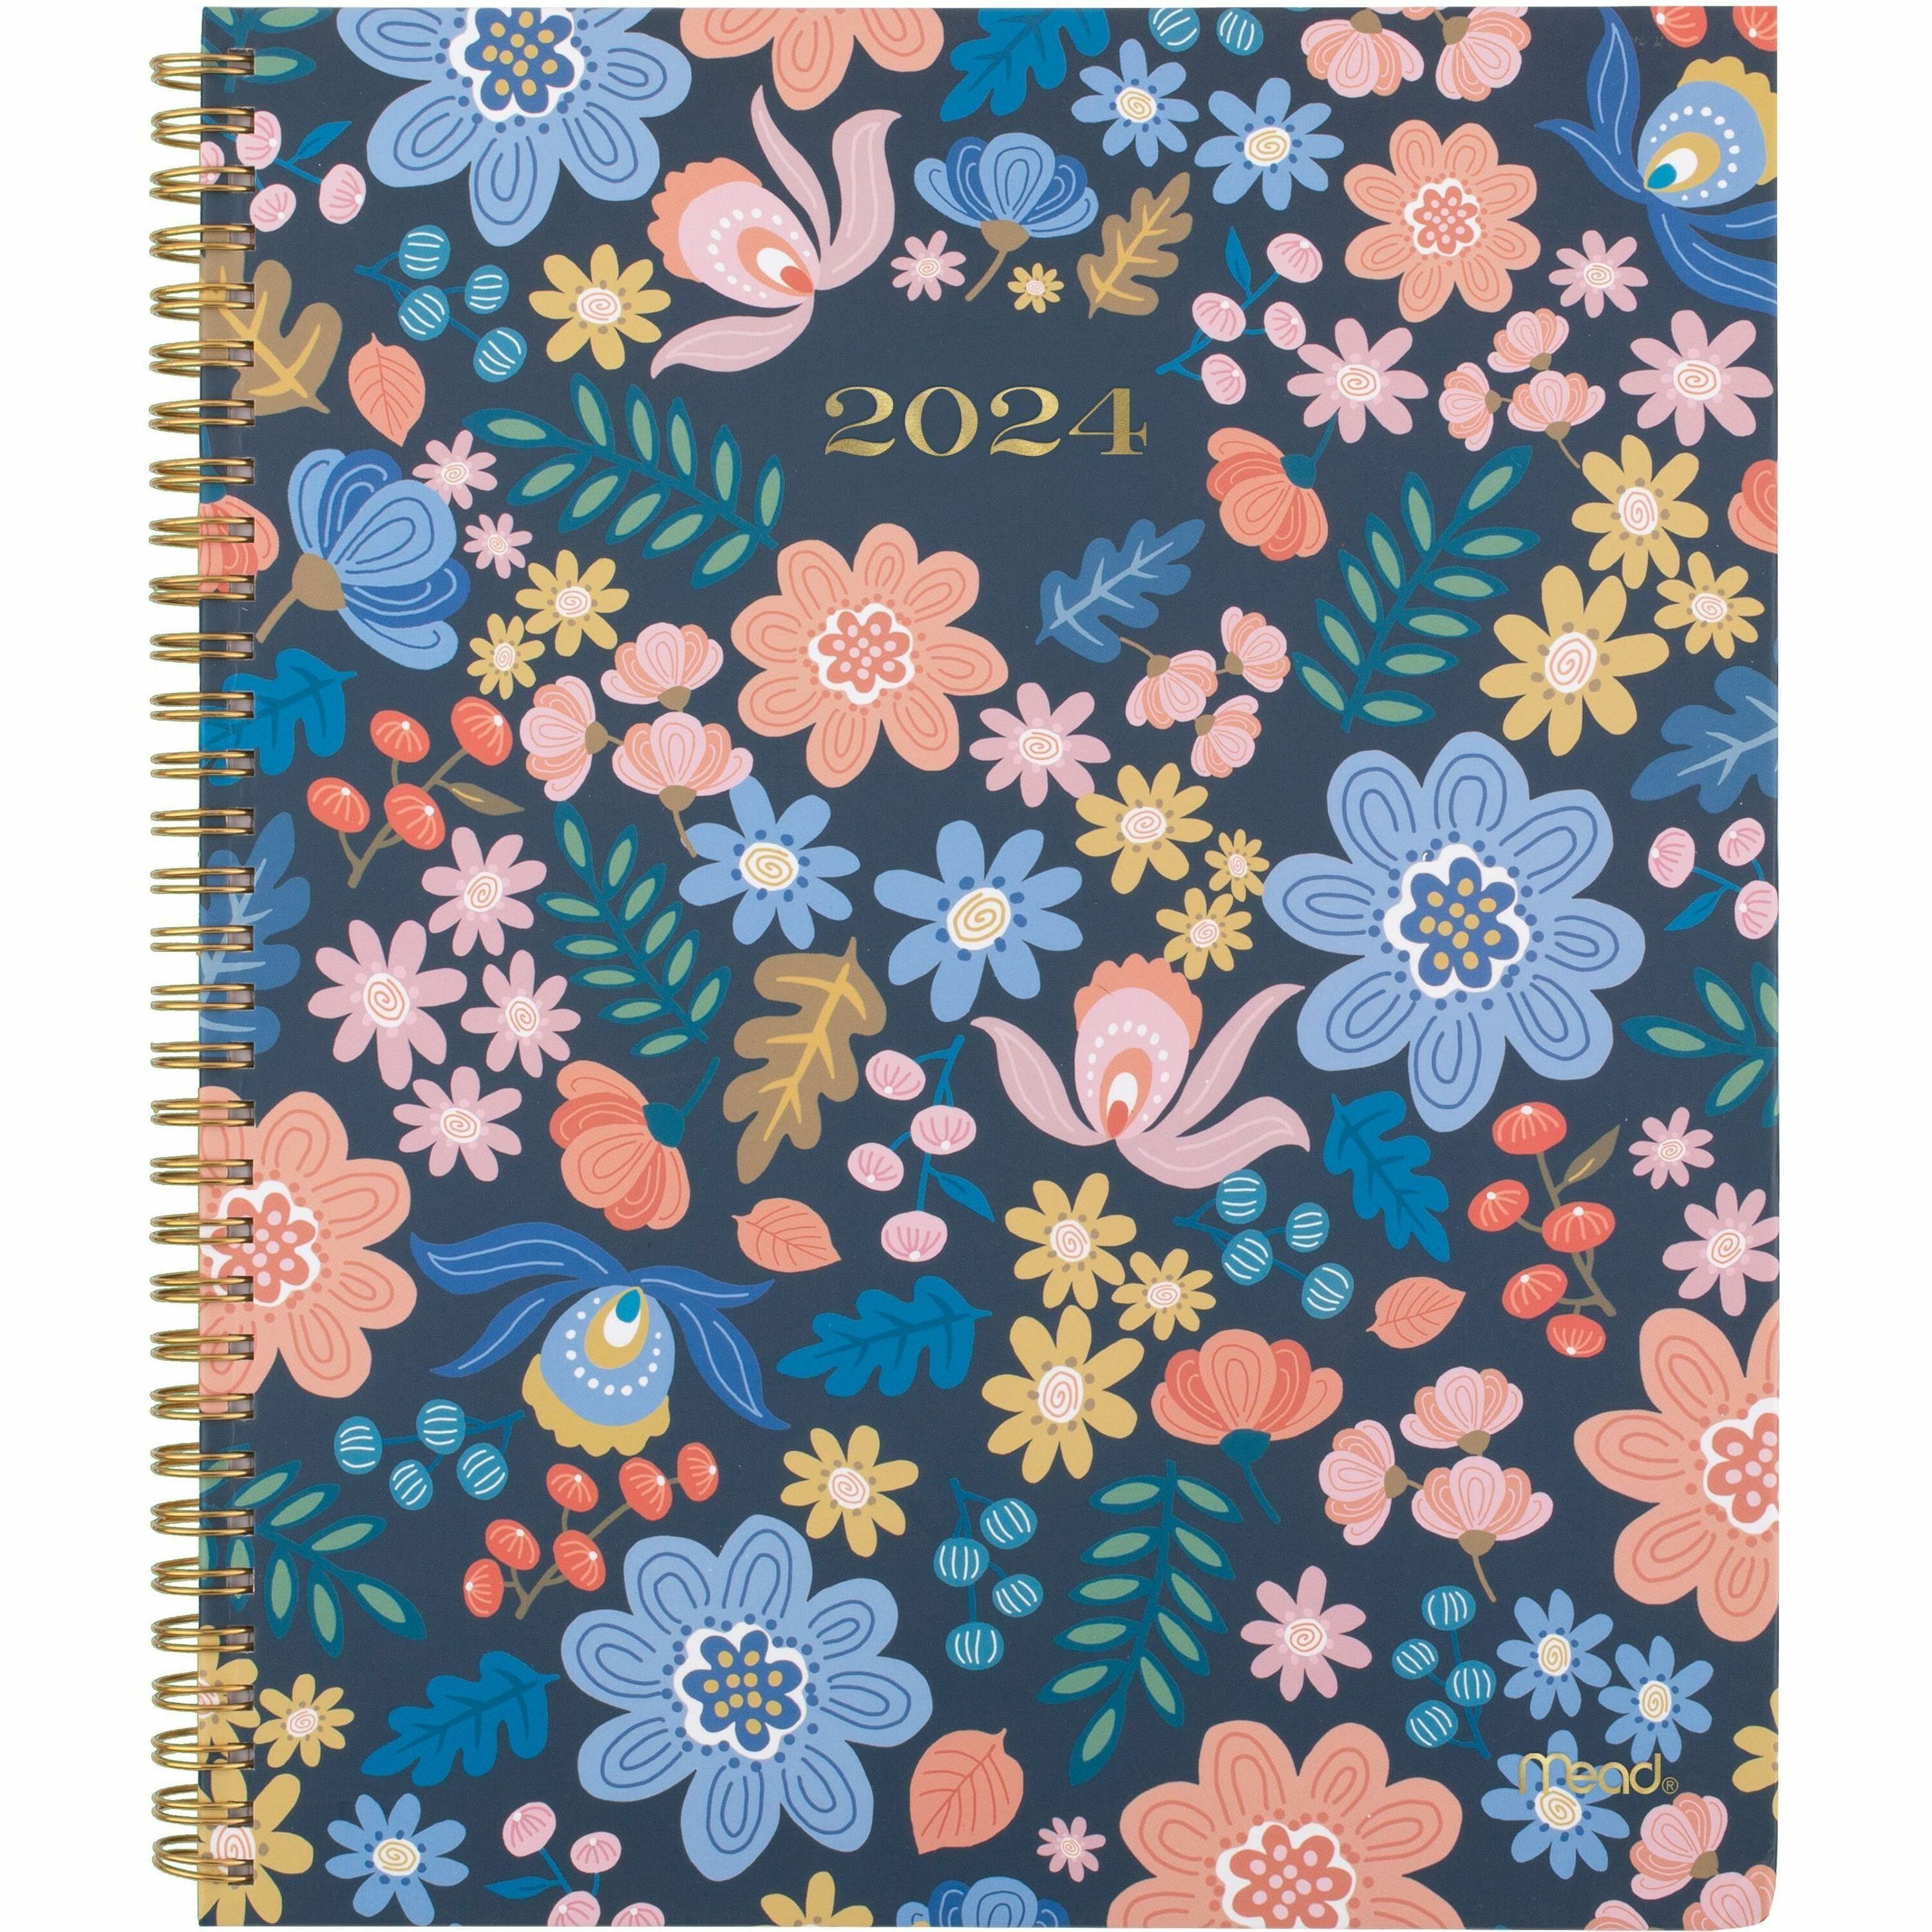 kamloops-office-systems-office-supplies-calendars-planners